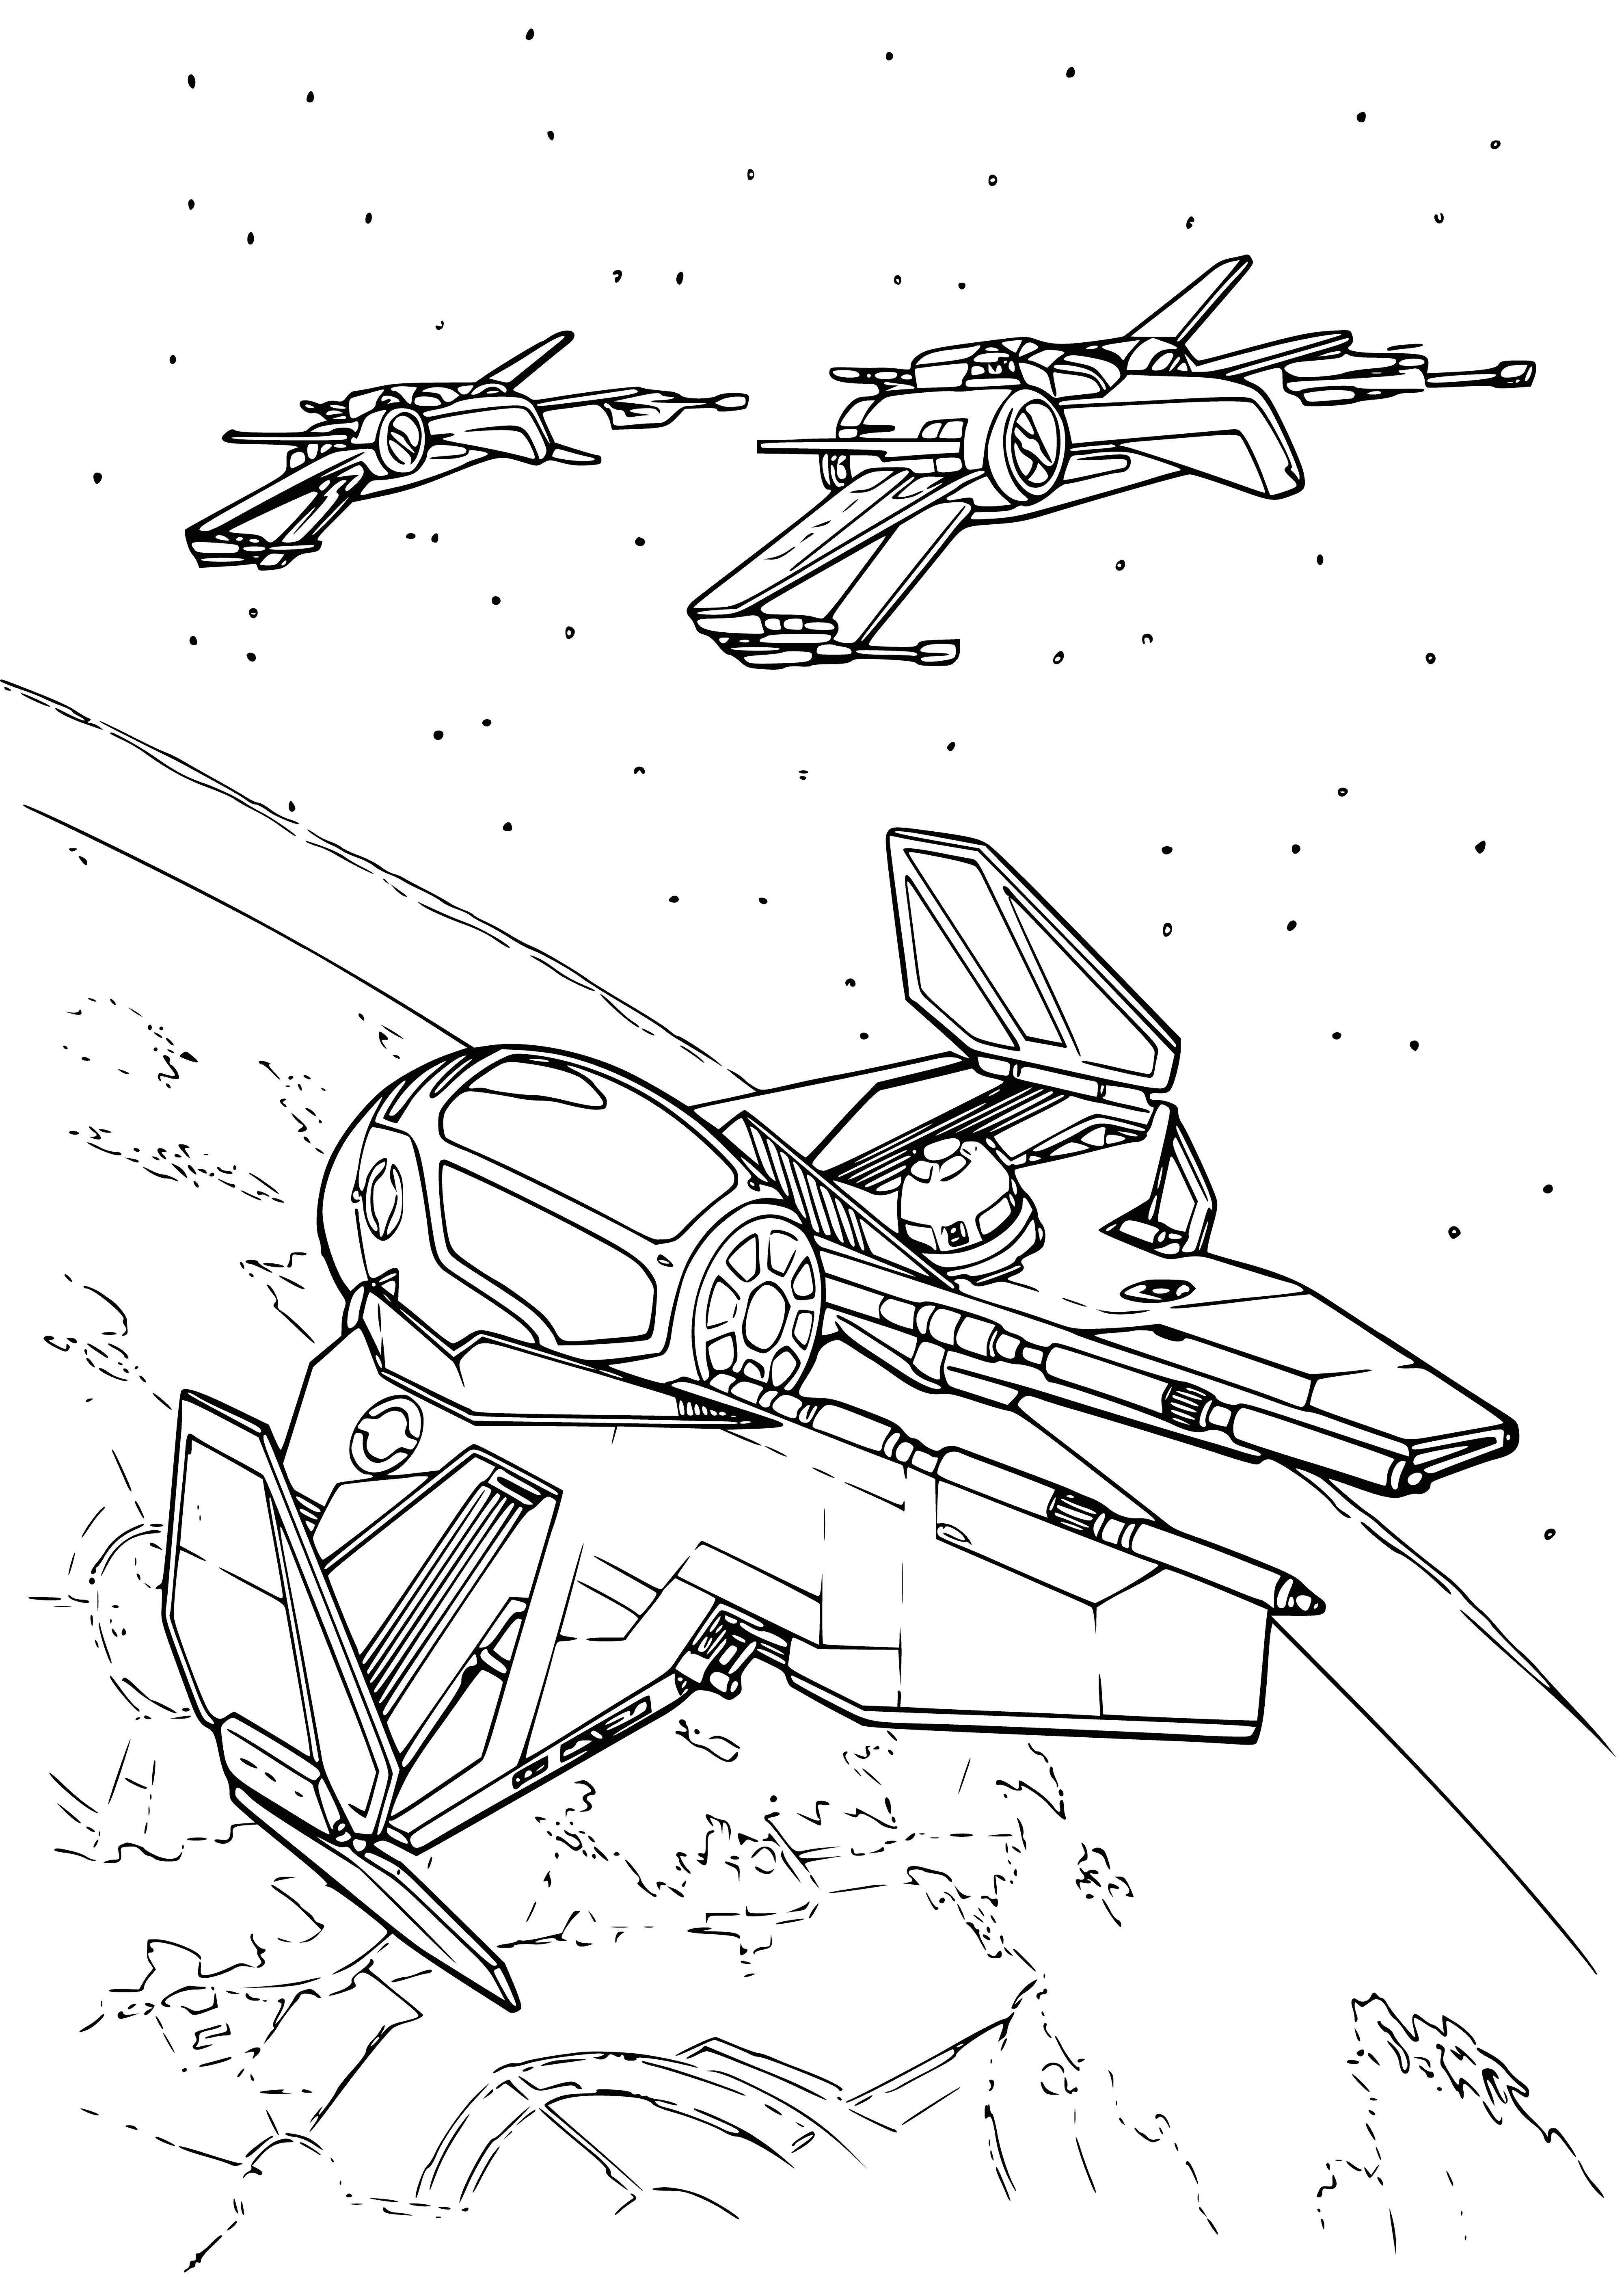 coloring page: Spaceship seen flying through space; long body, two large wings, white w/ blue stripe, small windows along the side.